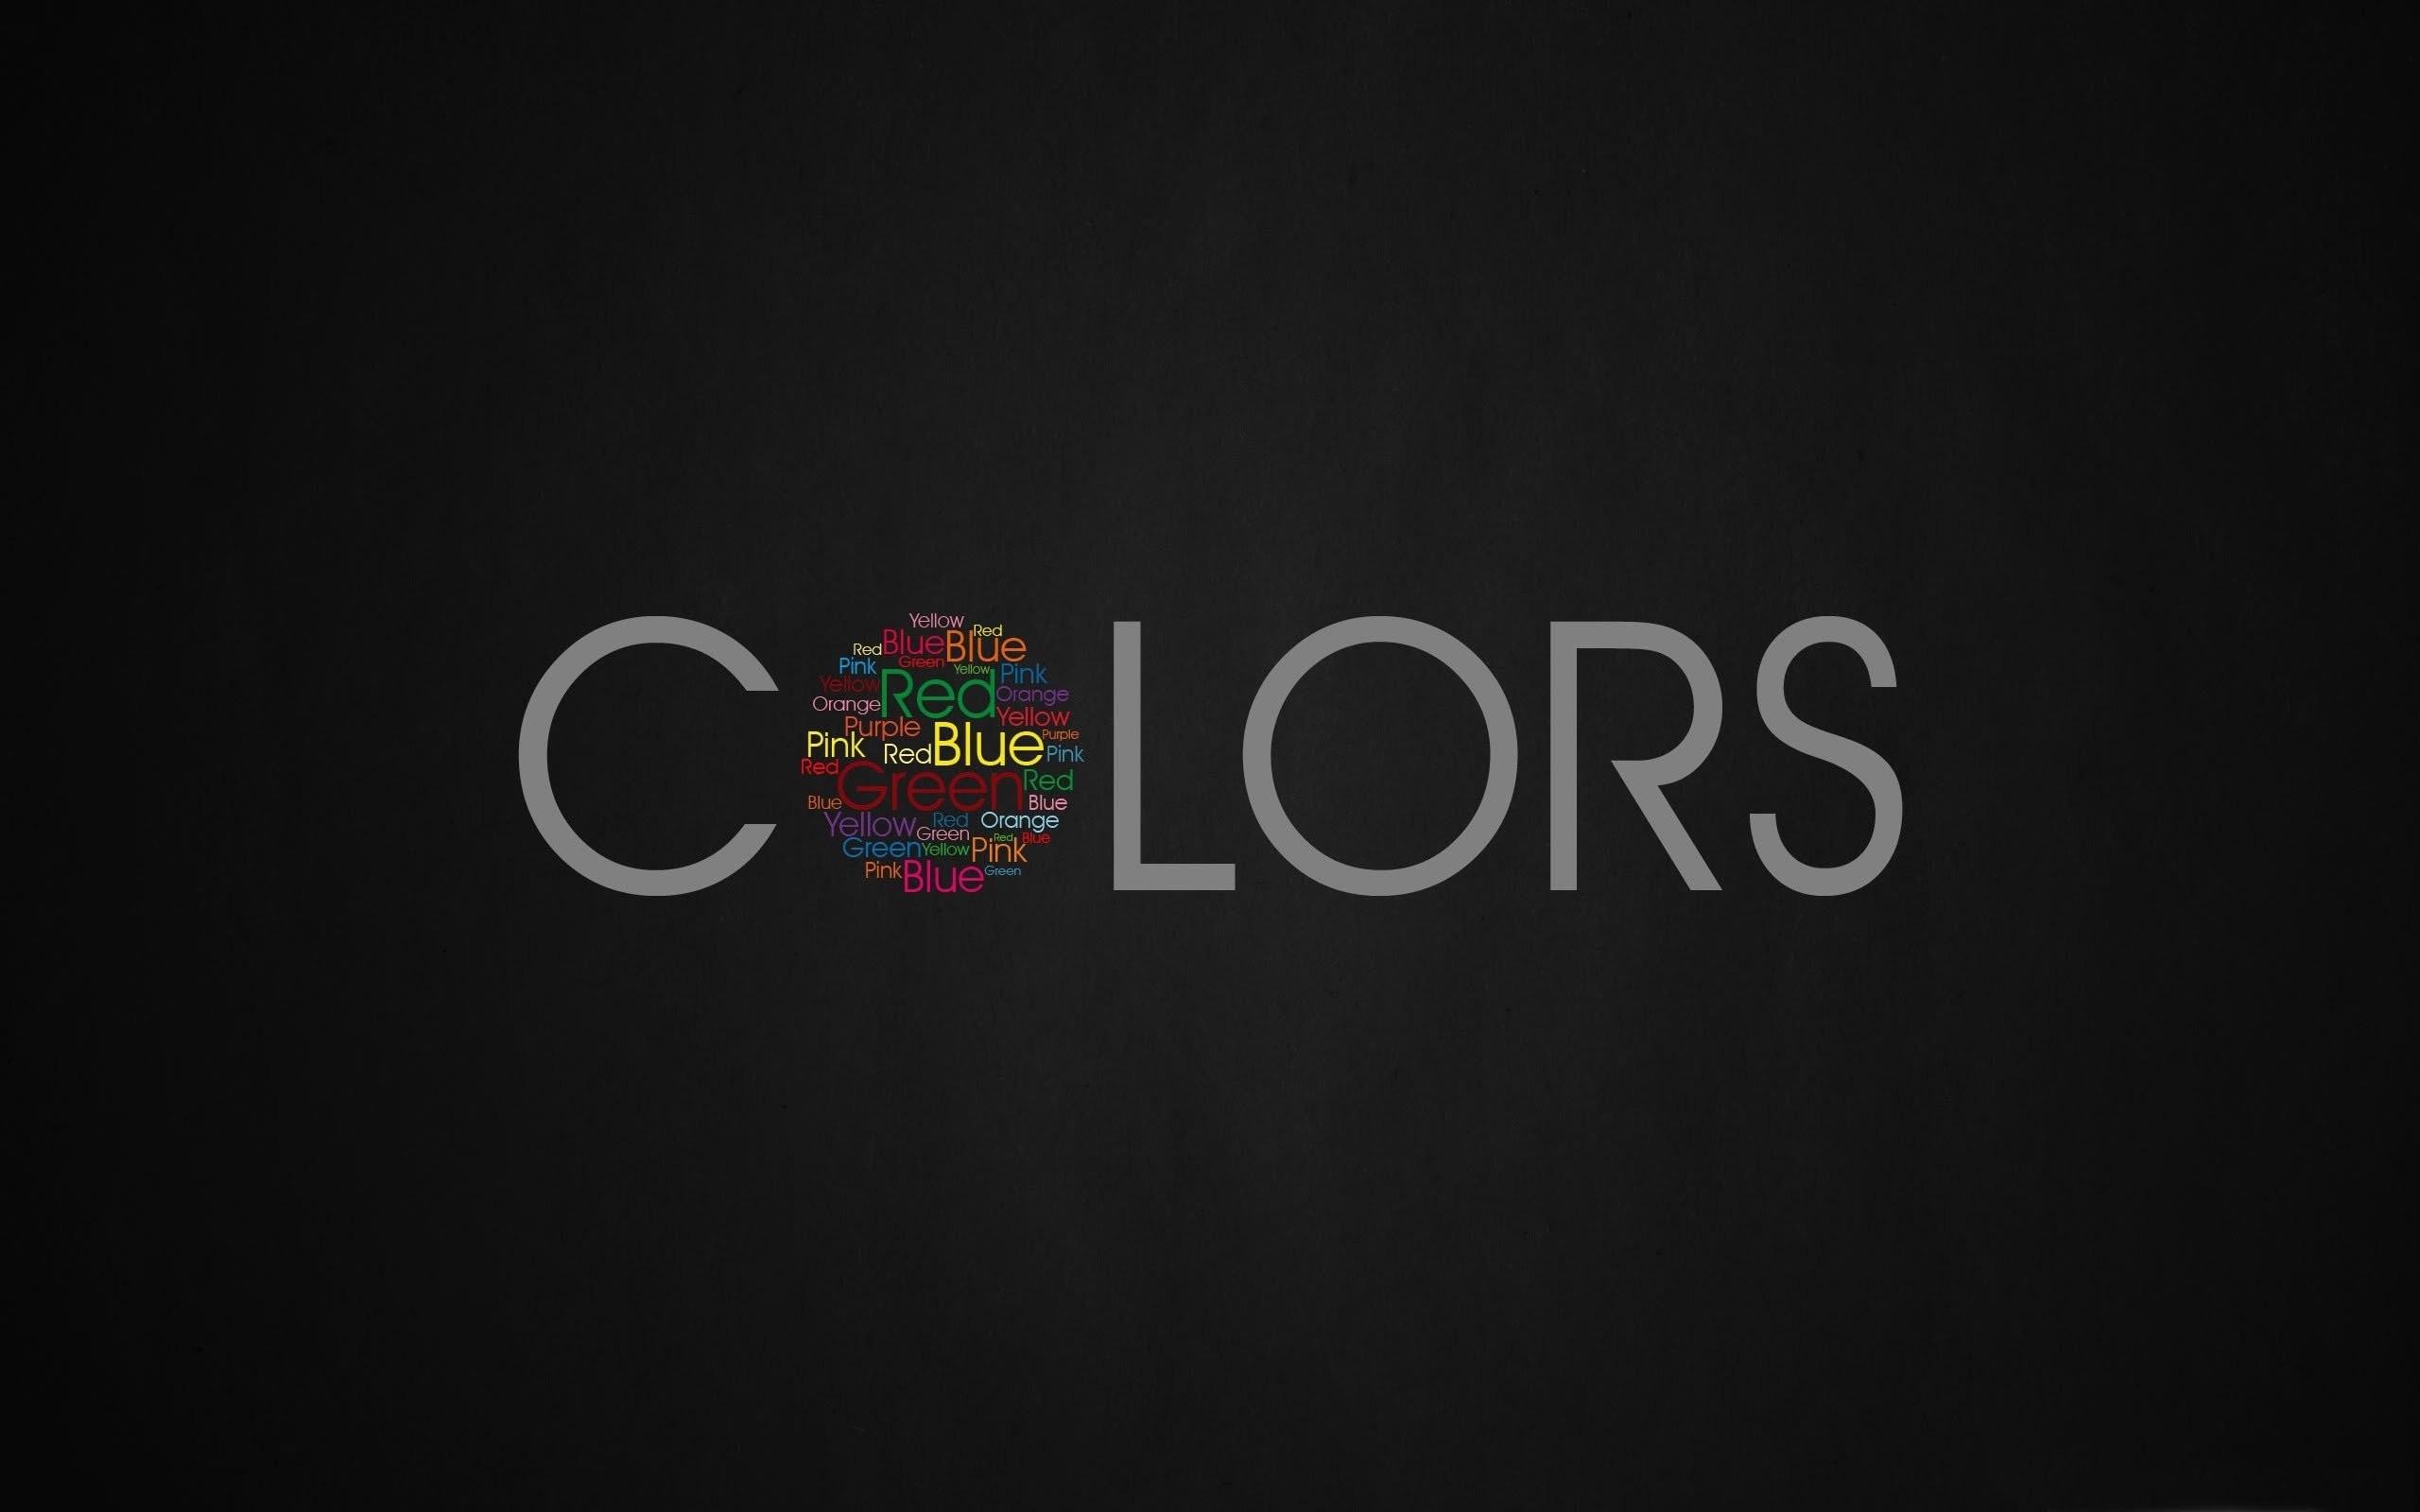 Black Background Minimalism Hybrid Red Blue Green Pink Purple Orange Yellow Hd Wallpapers Desktop And Mobile Images Amp Photos 2560x1600